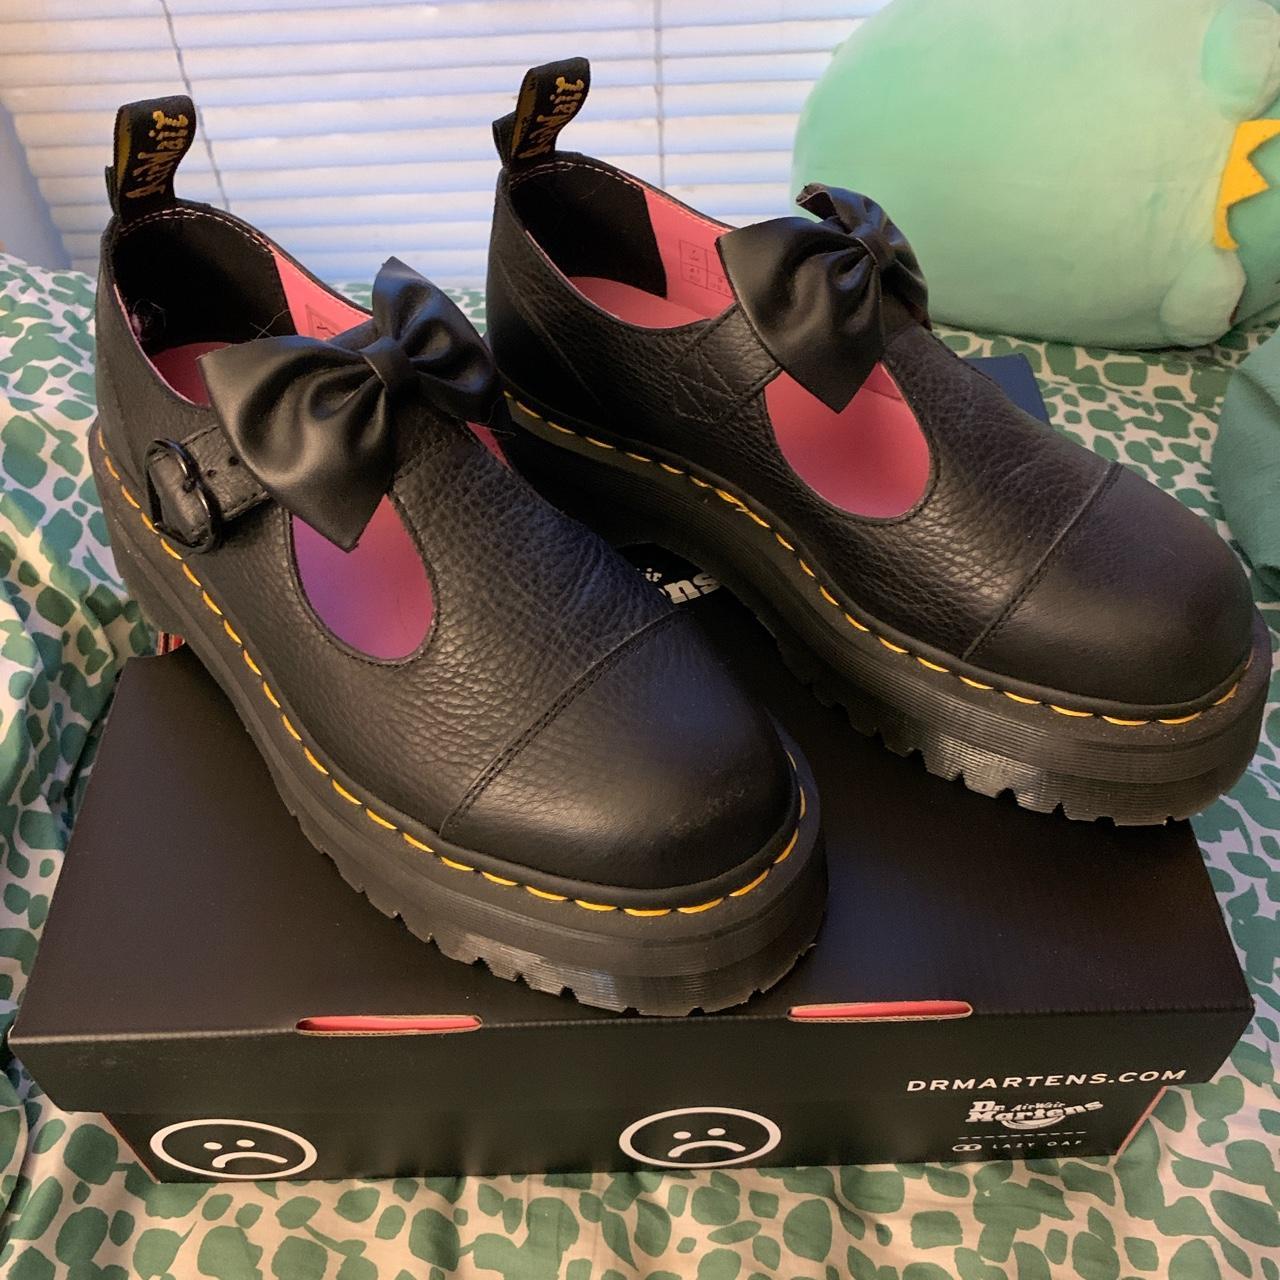 DR MARTENS X LAZY OAF BETHAN MARY JANES 🦩 extremely... - Depop